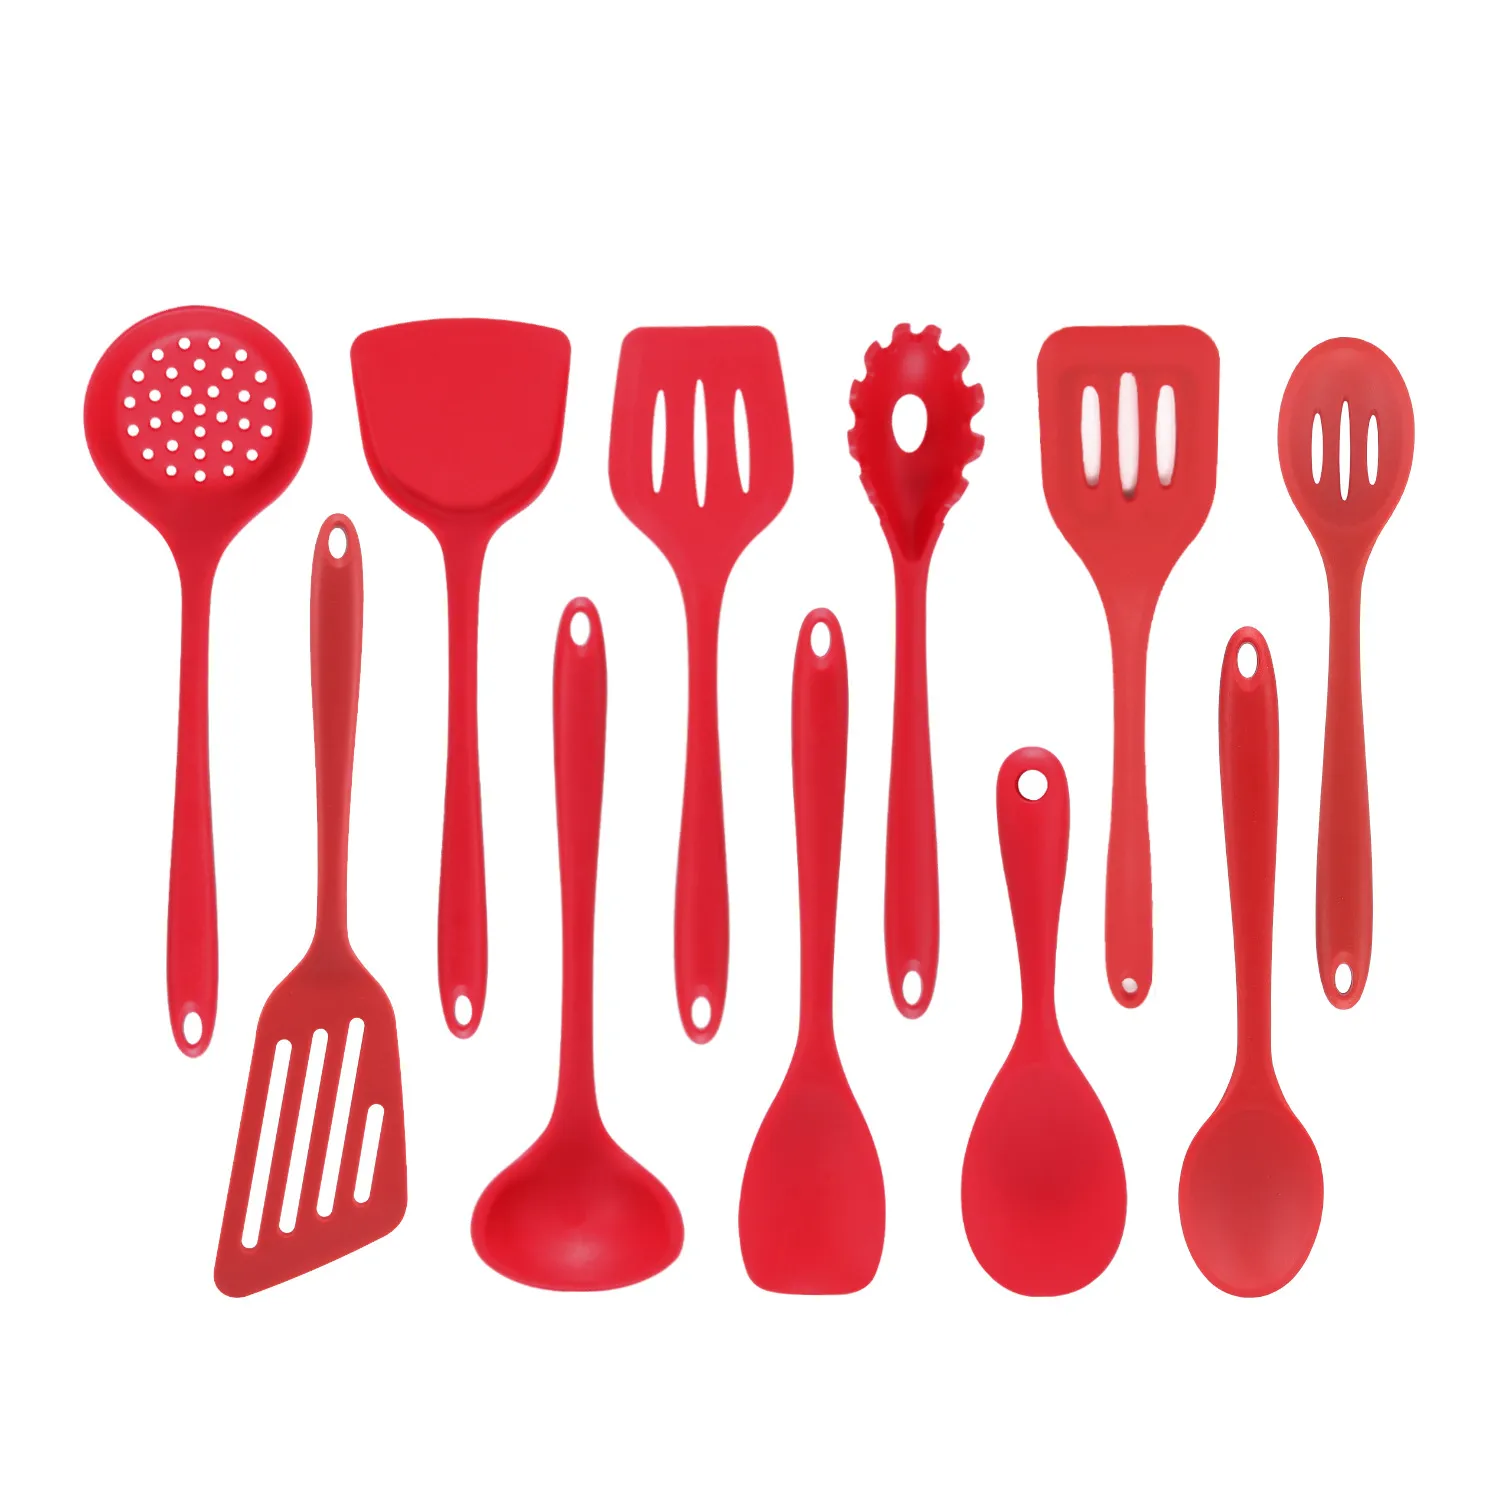 Utensils Kitchenware Nordic Home And Utensils Tool Gadgets Sets Kitchen Accessories Cooking Tools